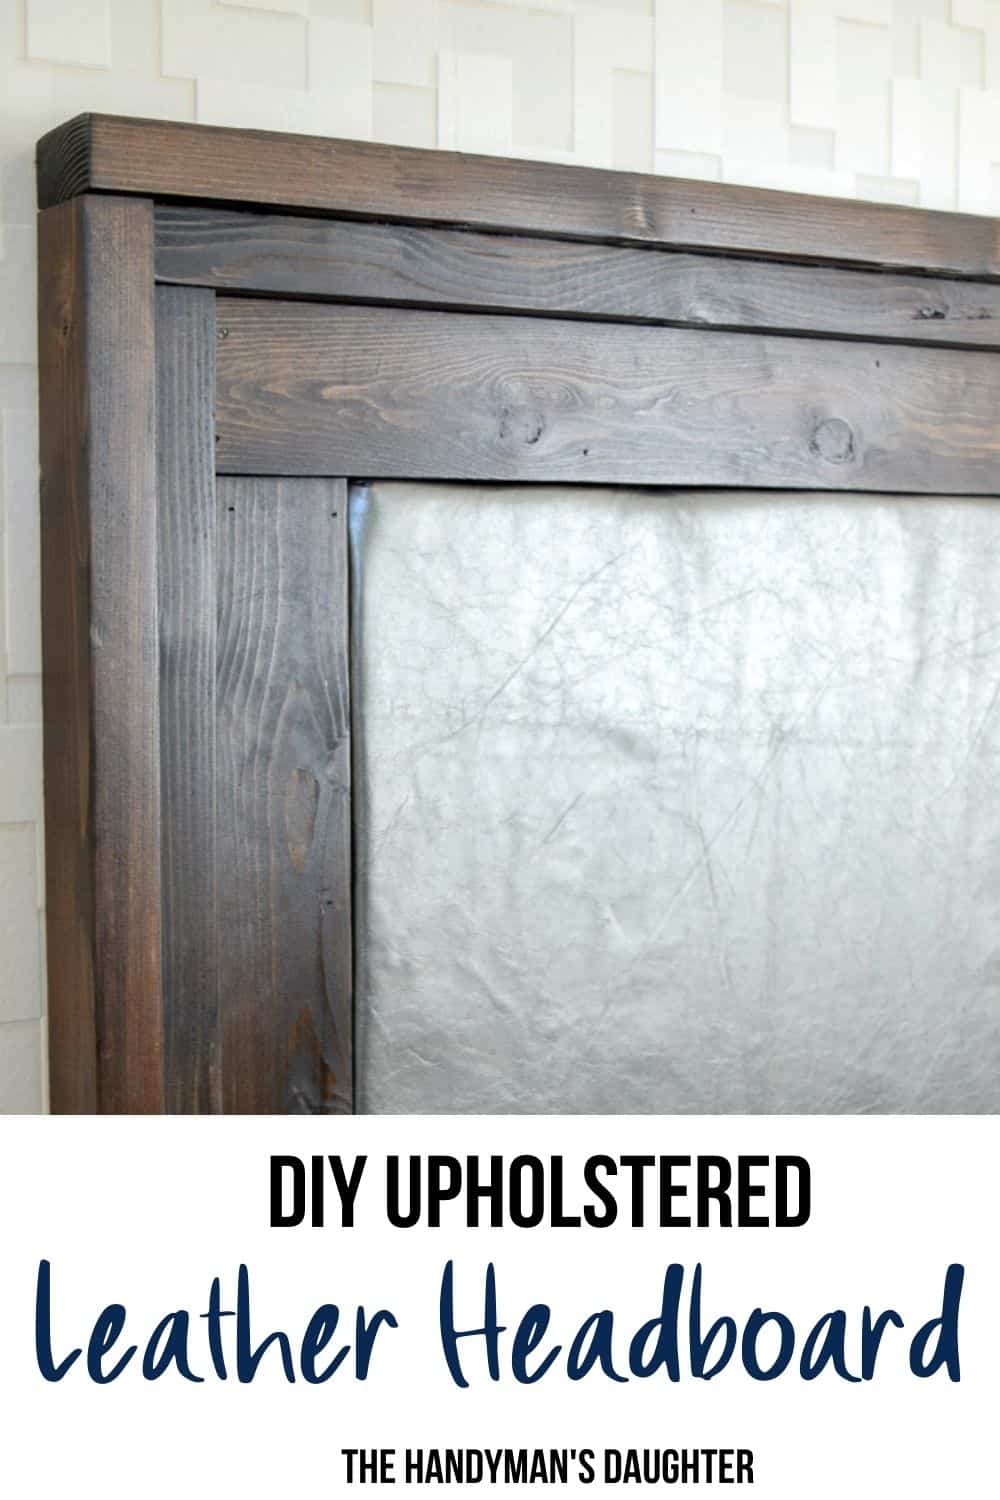 Diy Upholstered Headboard With Wood, Wood And Leather Headboard